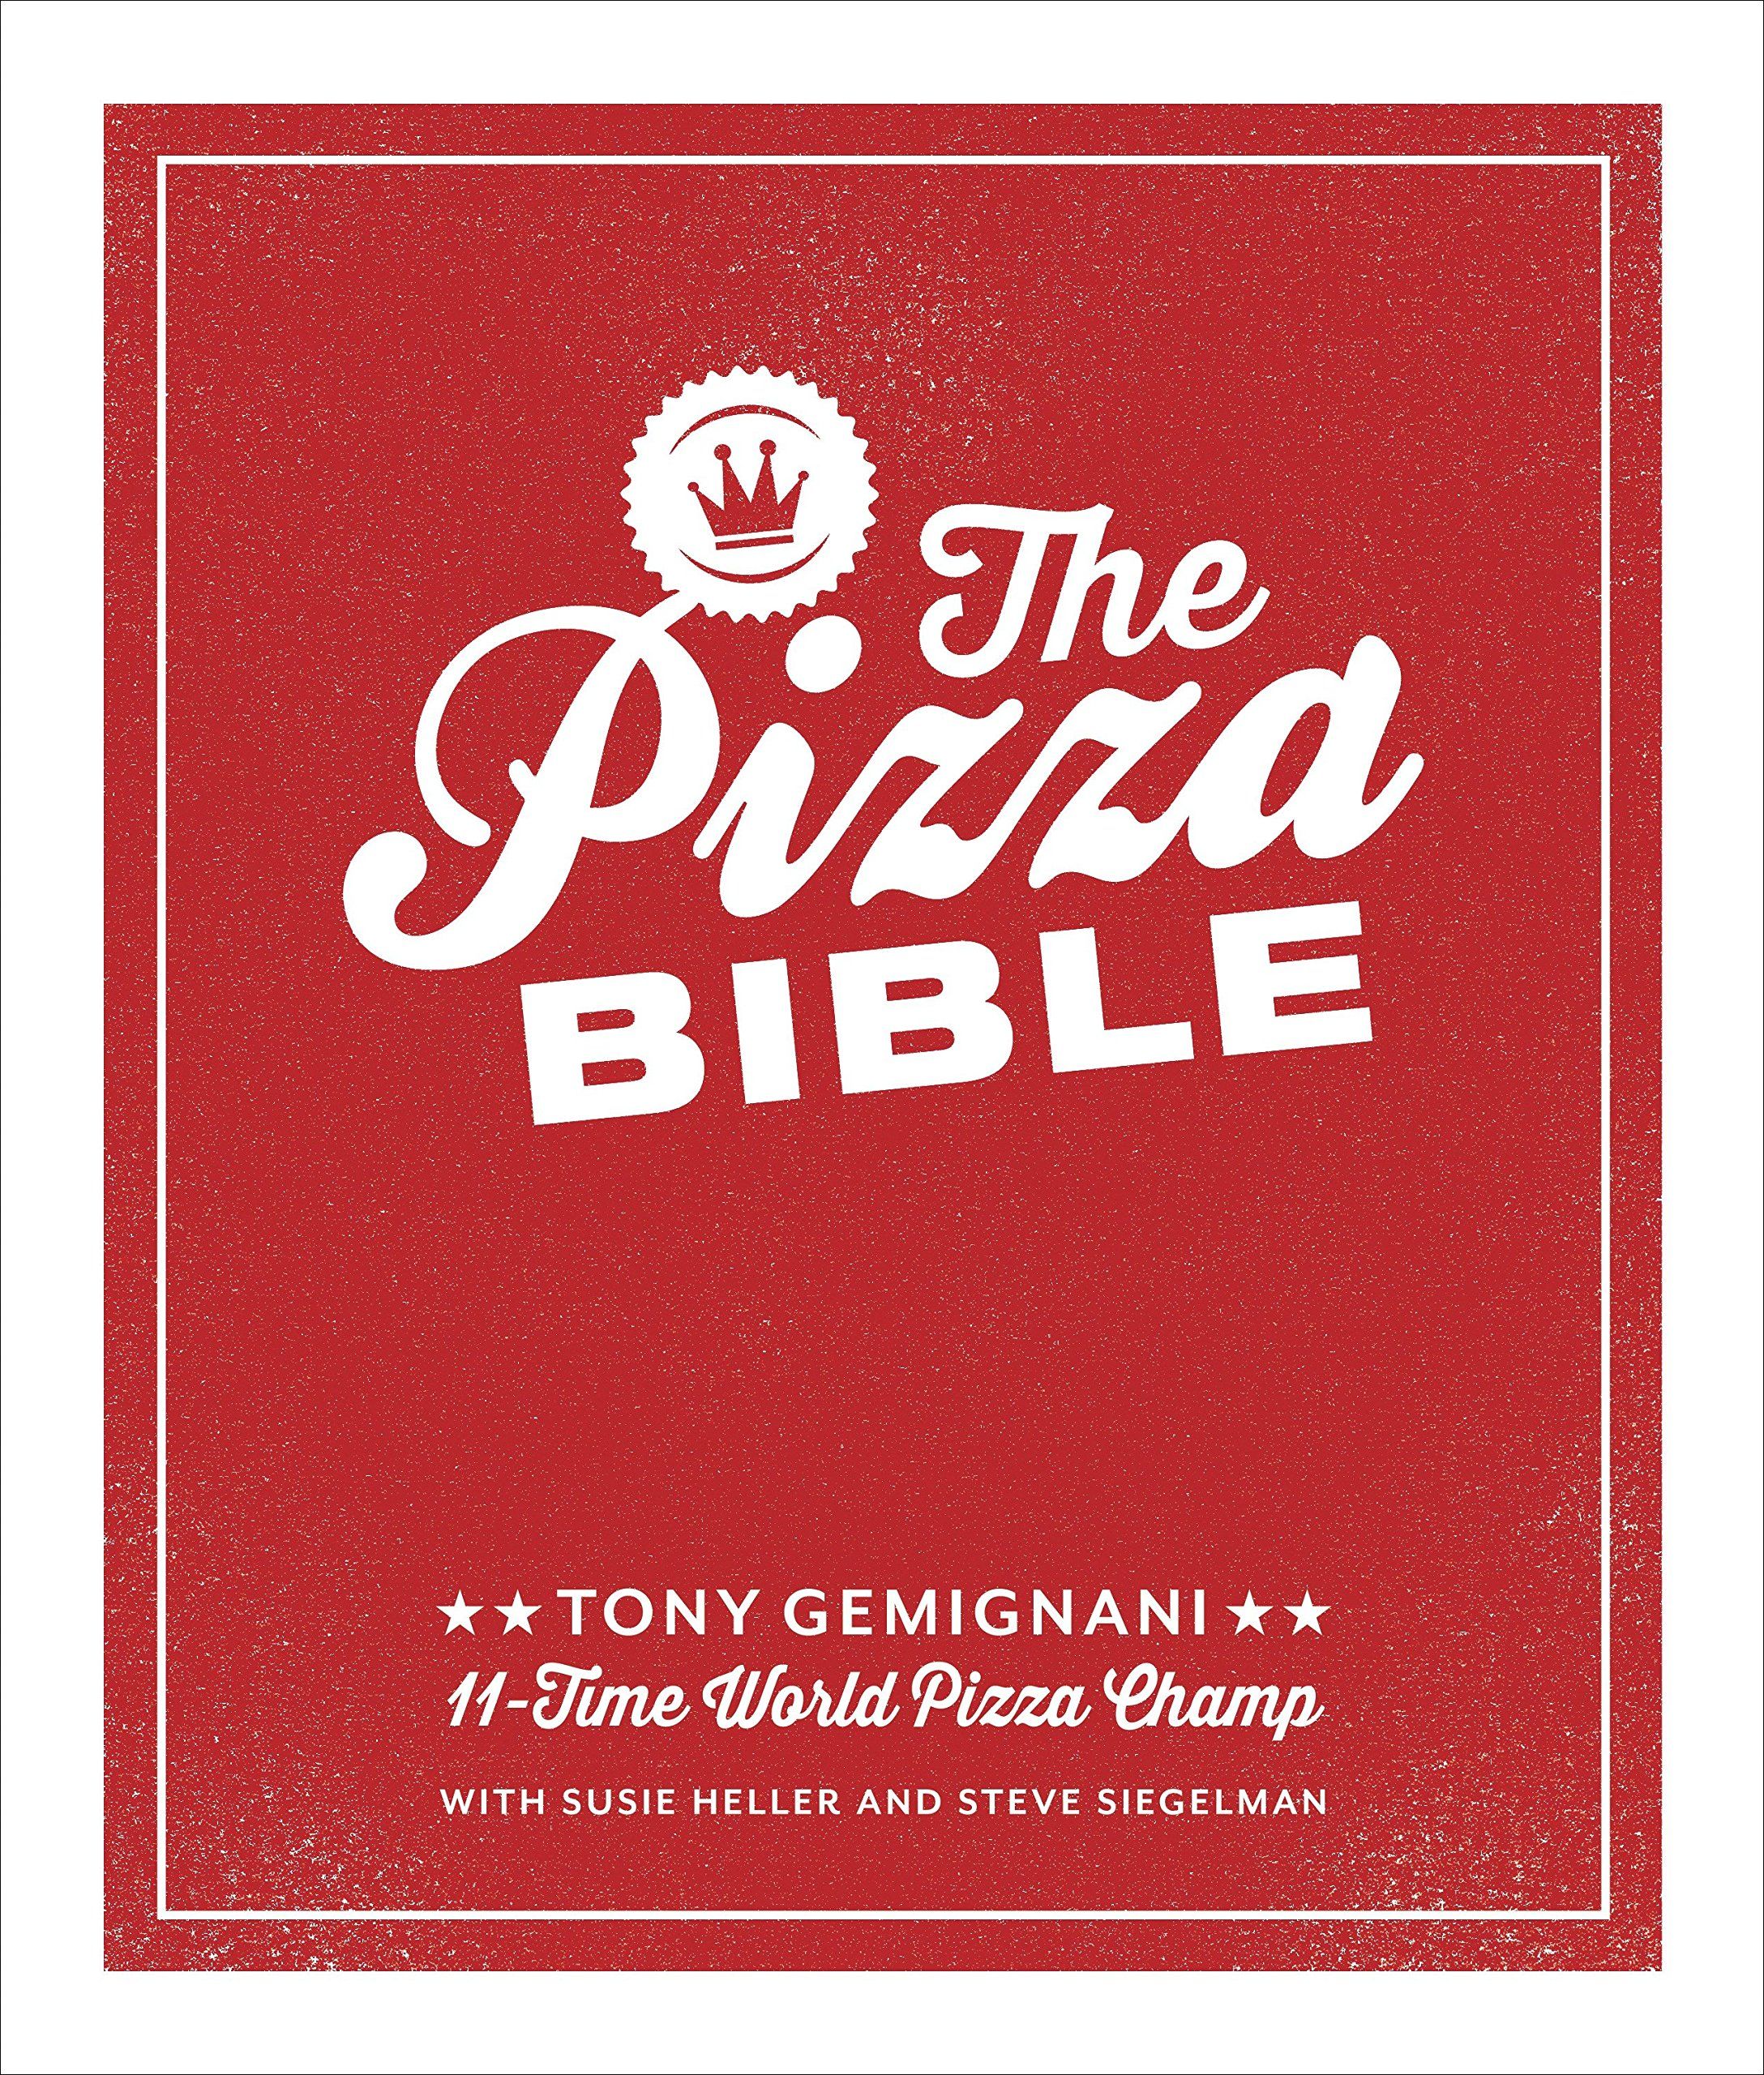 The Pizza Bible cover